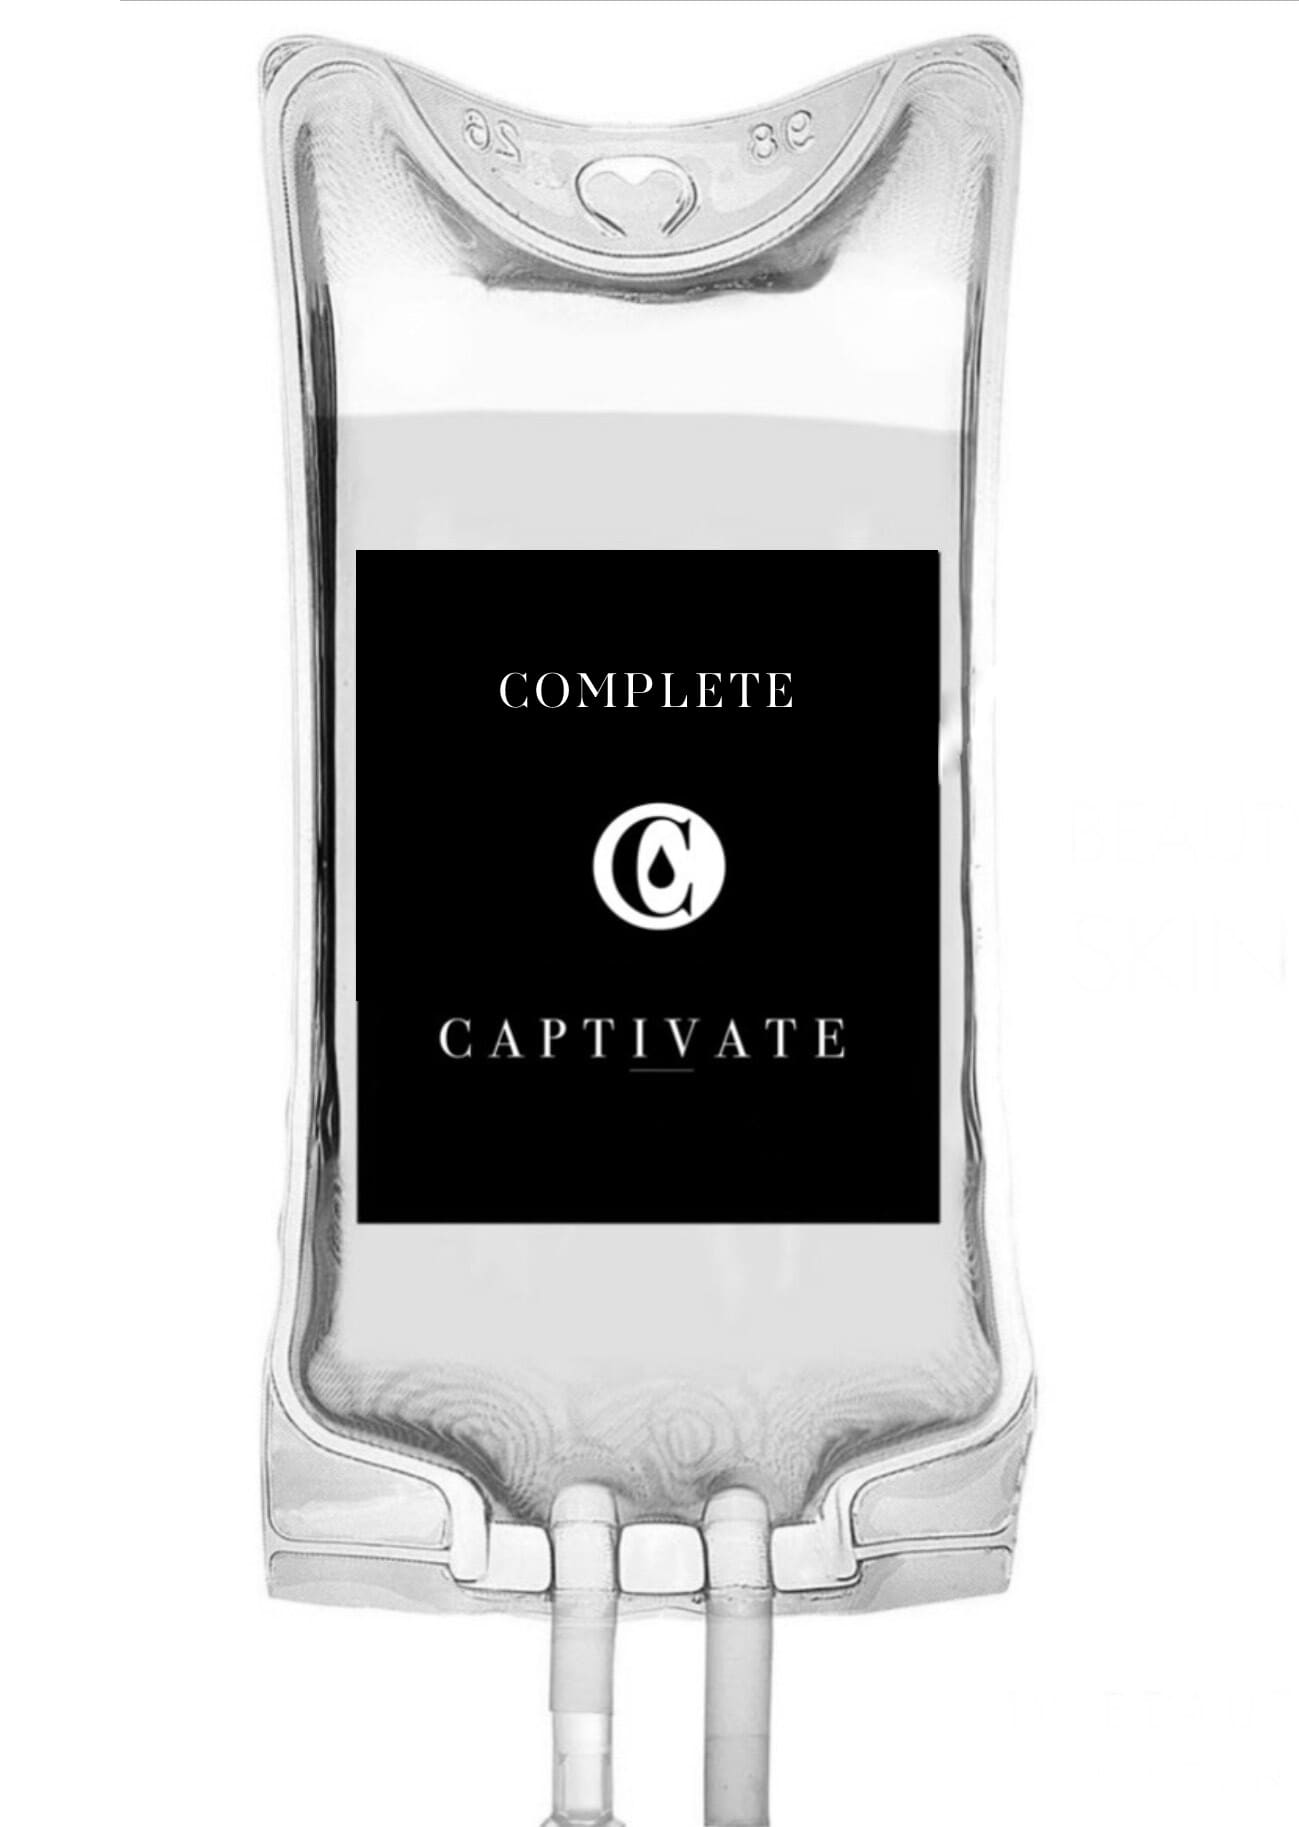 Captivate Complete IV drips